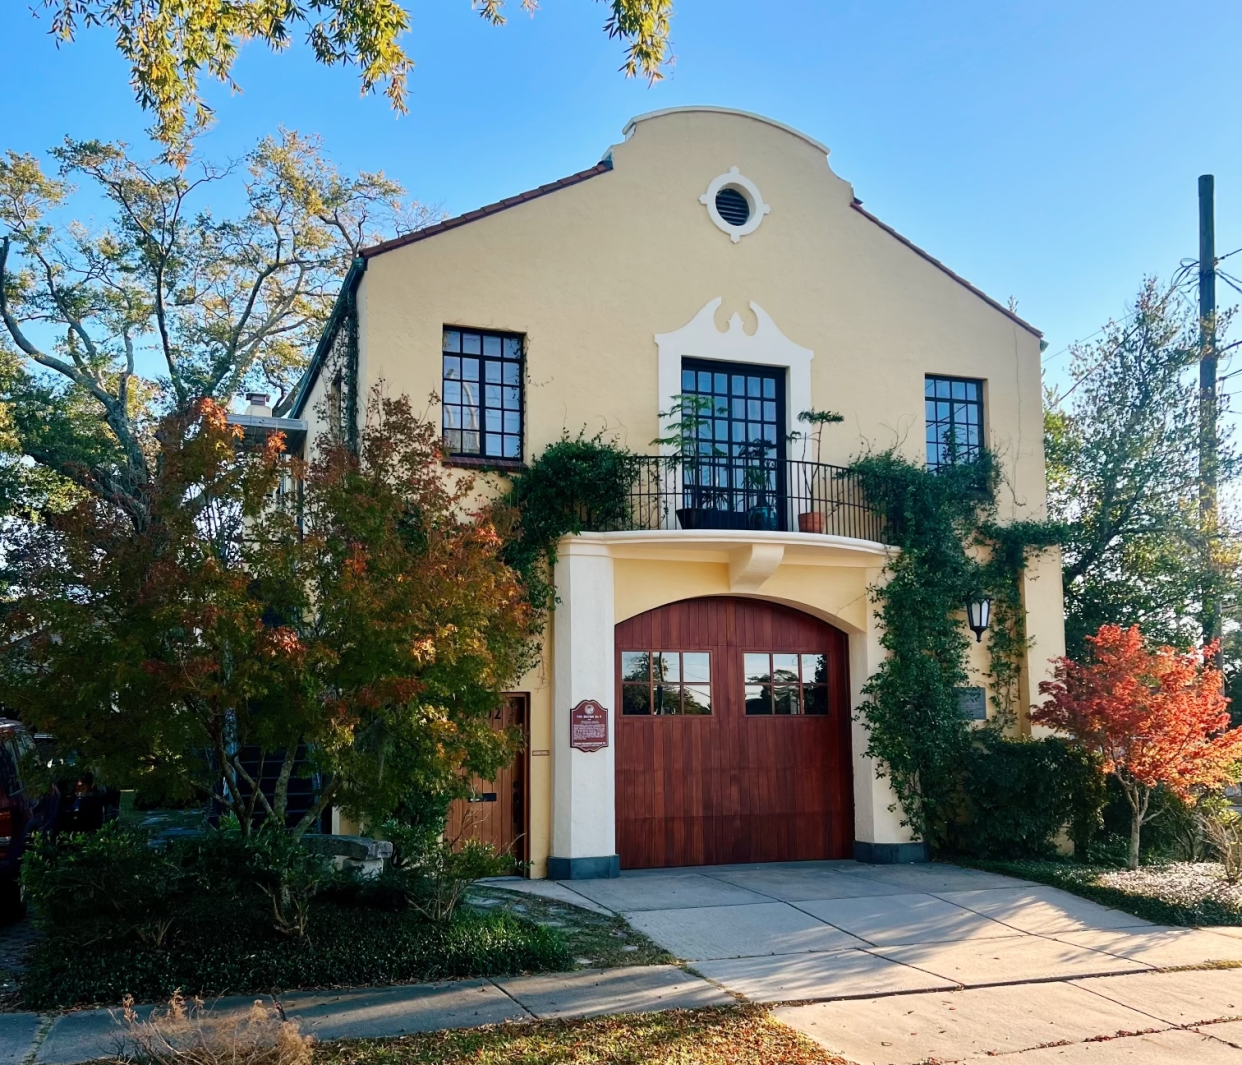 Fire Station No. 5, located at 1702 Wrightsville Ave., is on this year's Azalea Festival Home Tour organized by the Historic Wilmington Foundation.